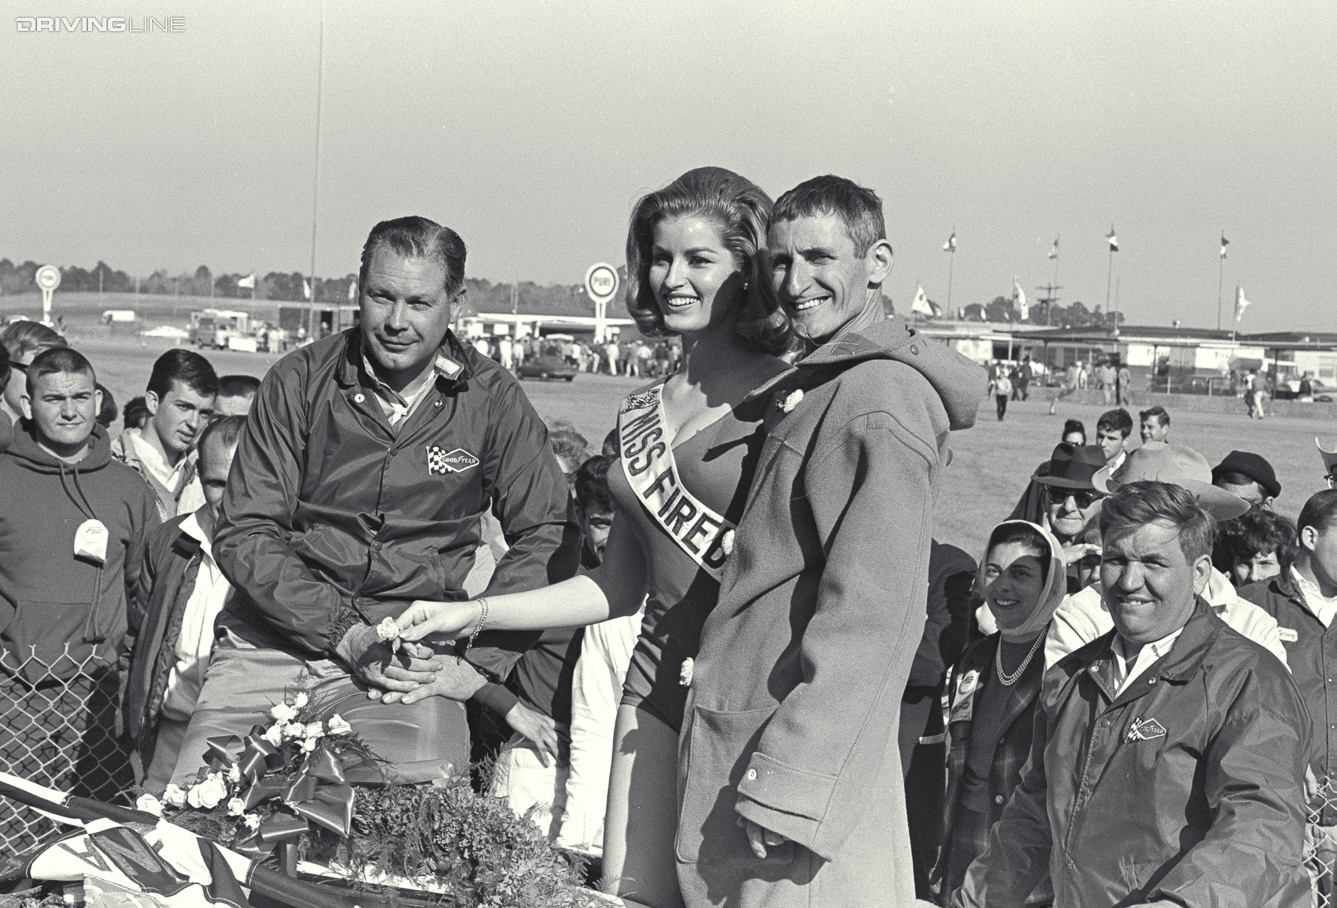 Daytona 24 Hour Race, Daytona, FL, 1966. Lloyd Ruby (left) and Ken Miles (right) in victory circle after winning their second consecutive race. CD#0777-3292-0443-5